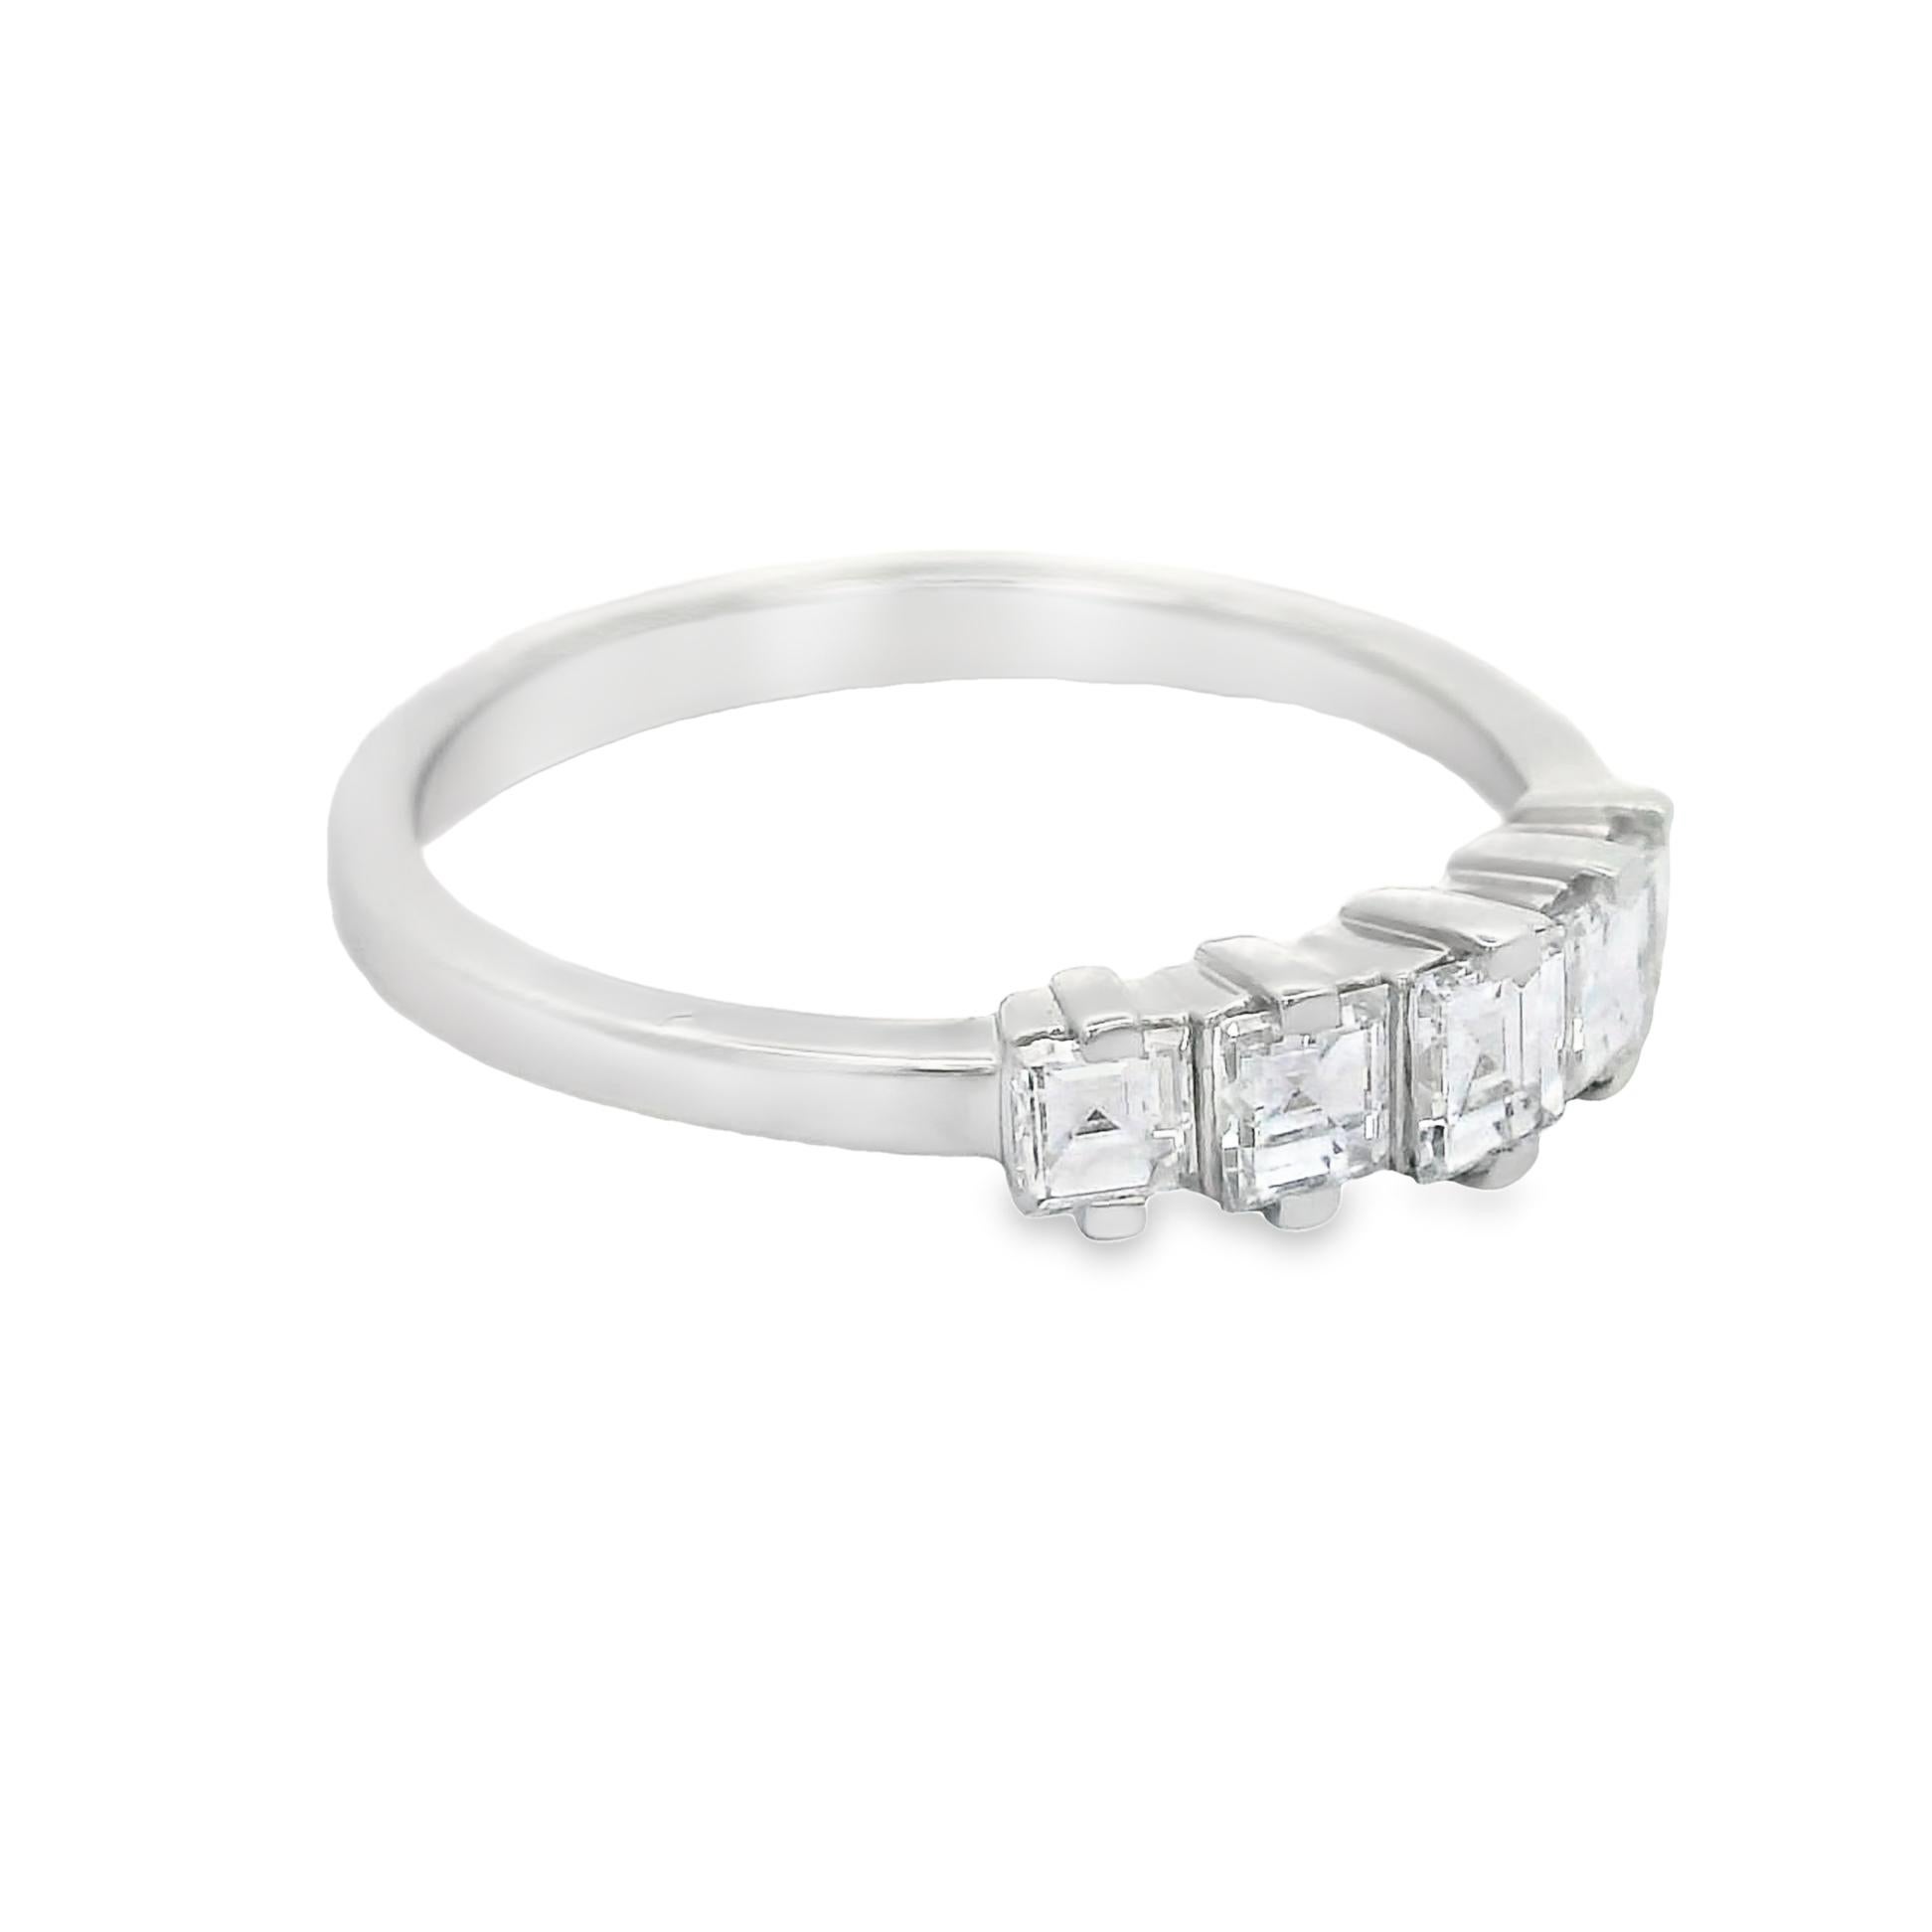 A five piece square cut diamond ring, featuring 5 stones weighing a total of 0.75 carats. The band is sleek and simple, allowing the diamonds to take center stage. Can be worn daily for everyday use. Made in 14k White gold and ready to worn!

The